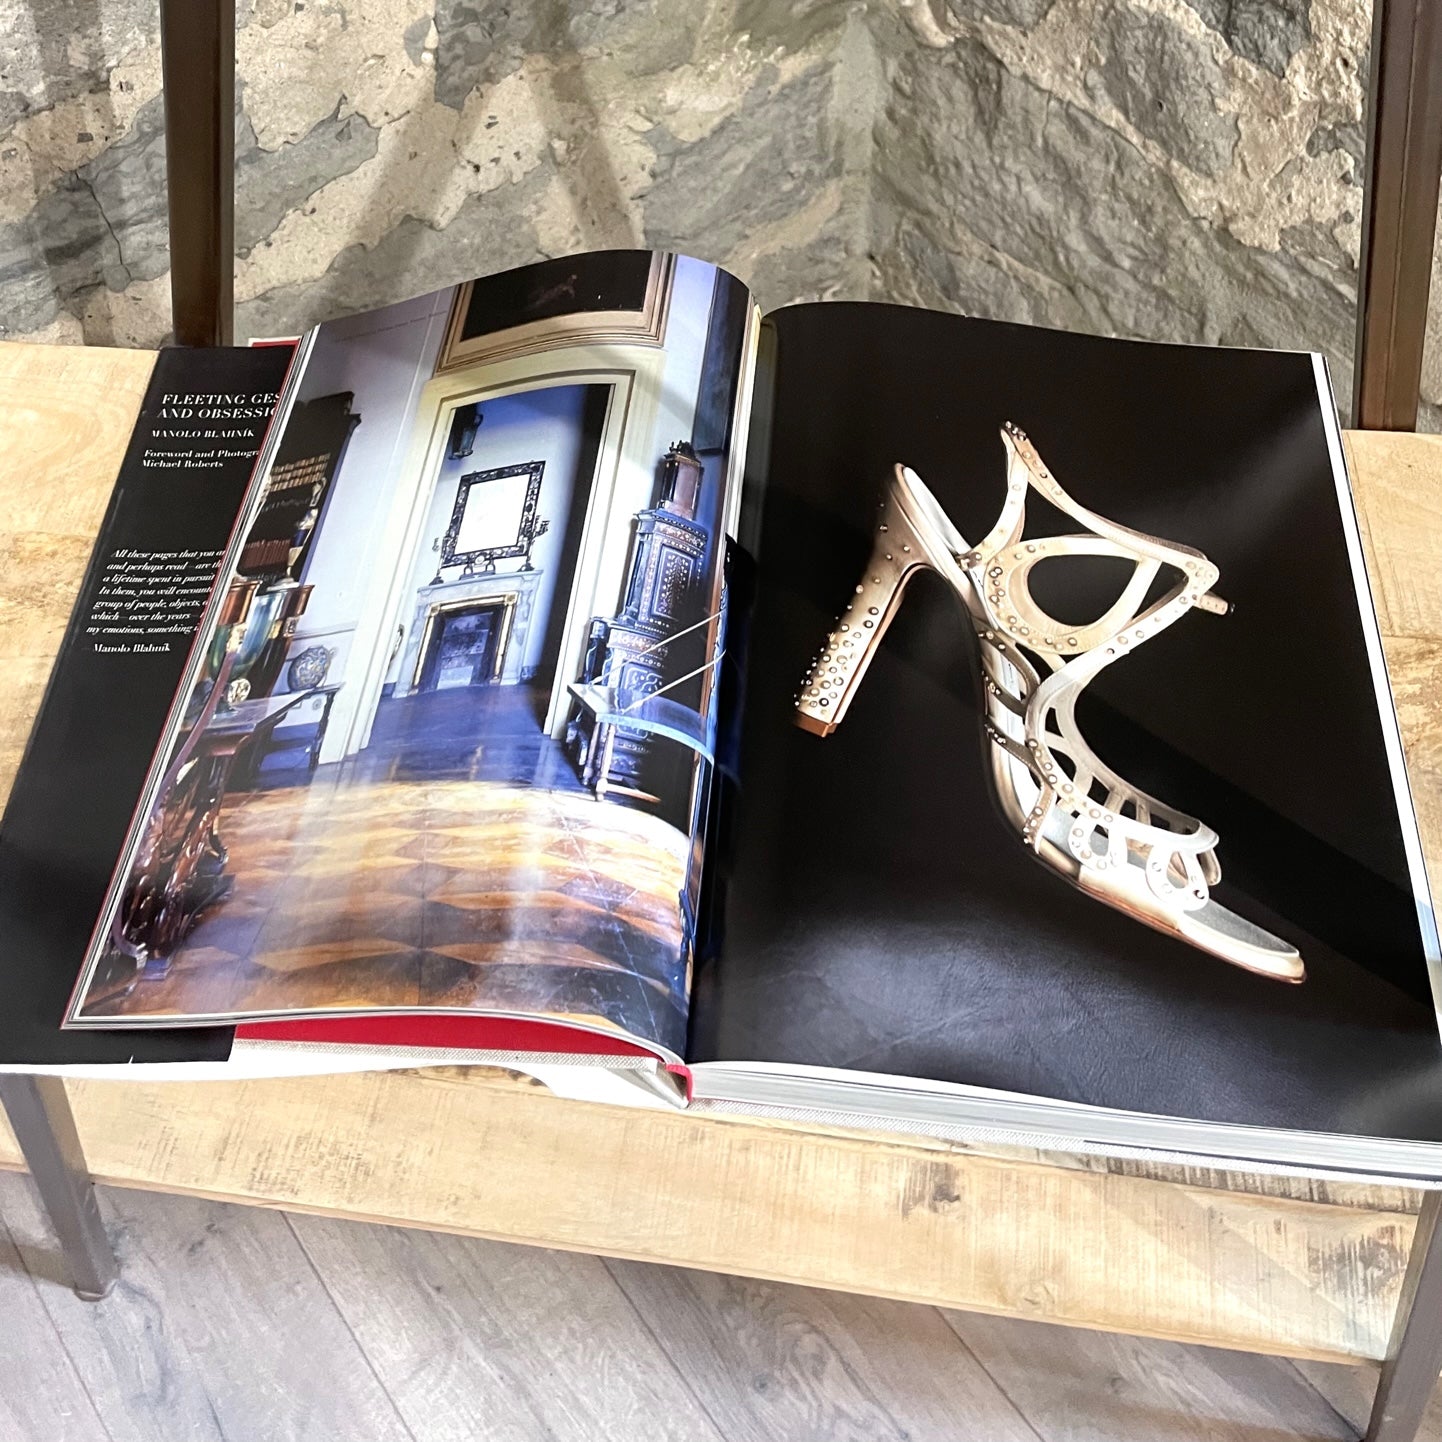 Manolo Blahnik: Fleeting Gestures and Obsessions Book – Boutique LUC.S